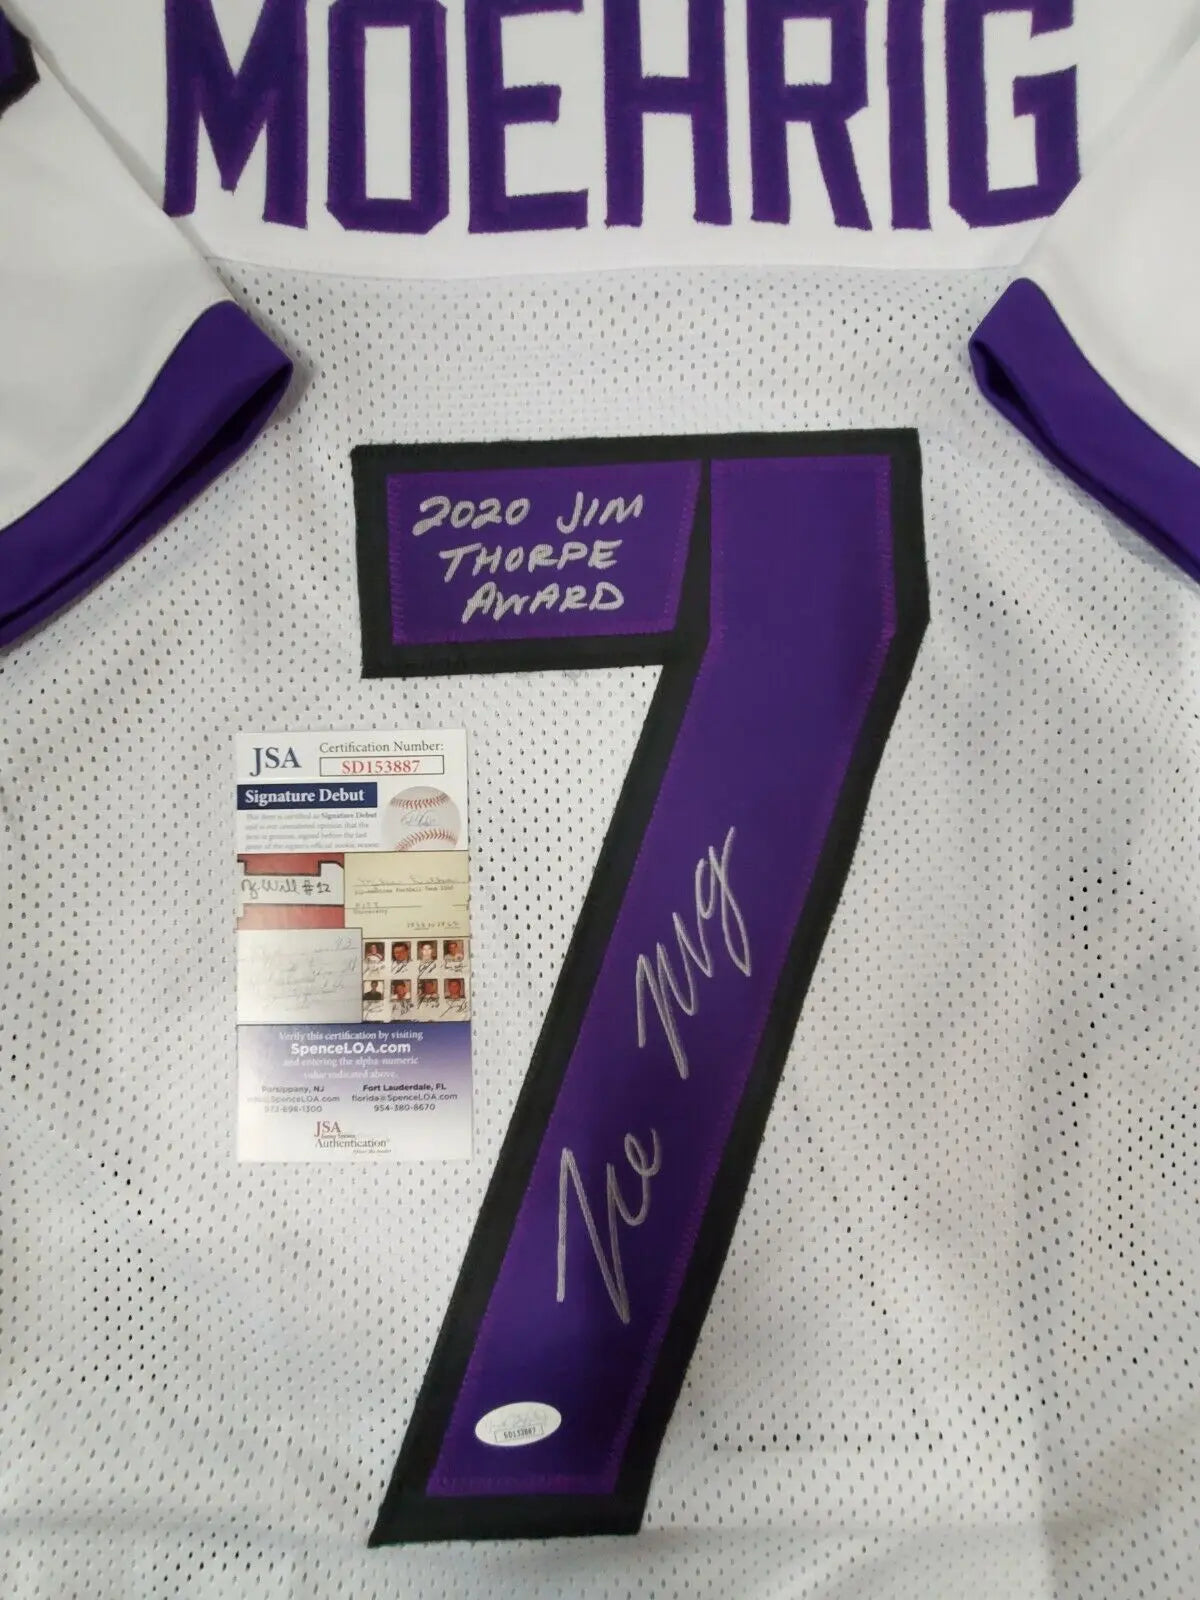 MVP Authentics Tcu Horned Frogs Tre'von Moehrig Autographed Signed Inscribed Jersey Jsa Coa 162 sports jersey framing , jersey framing